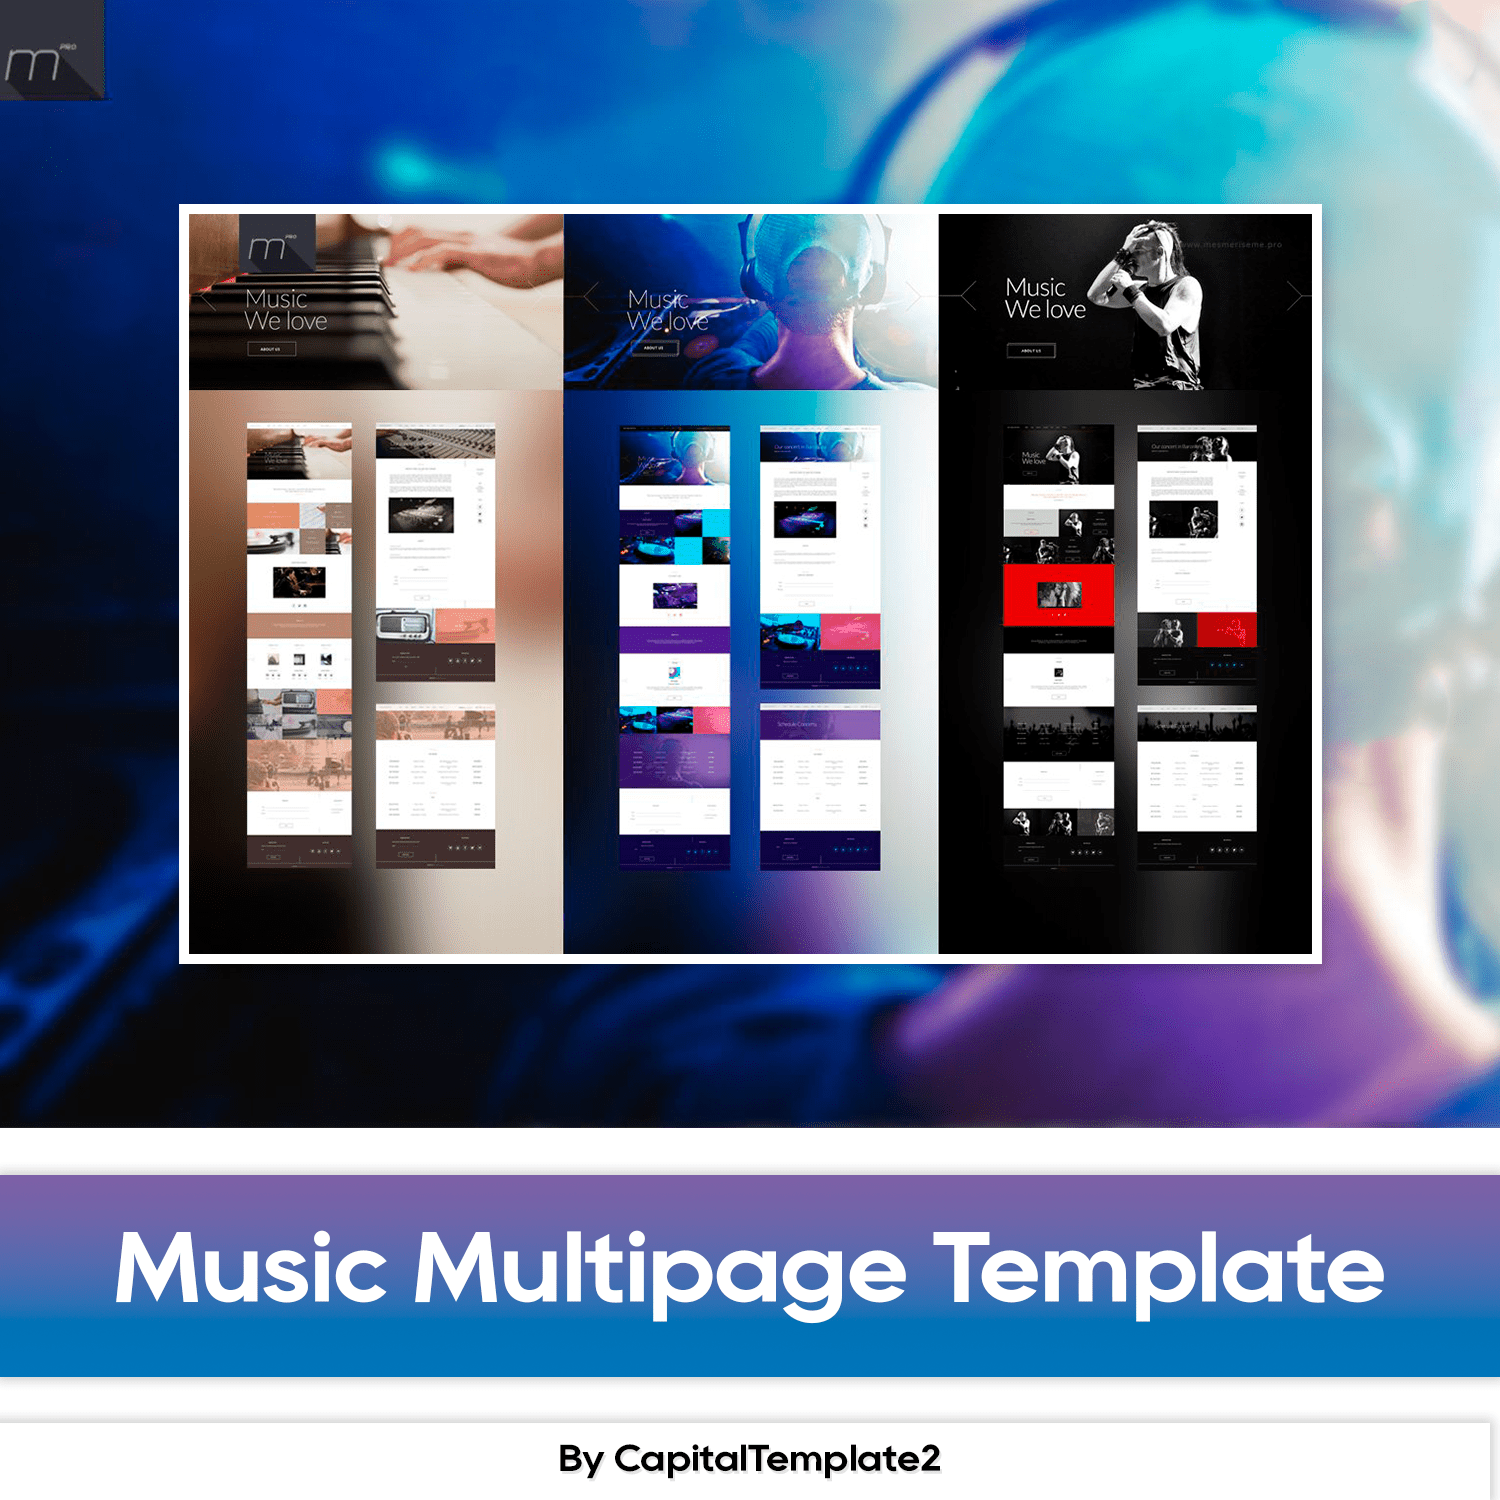 Music Multipage Template.